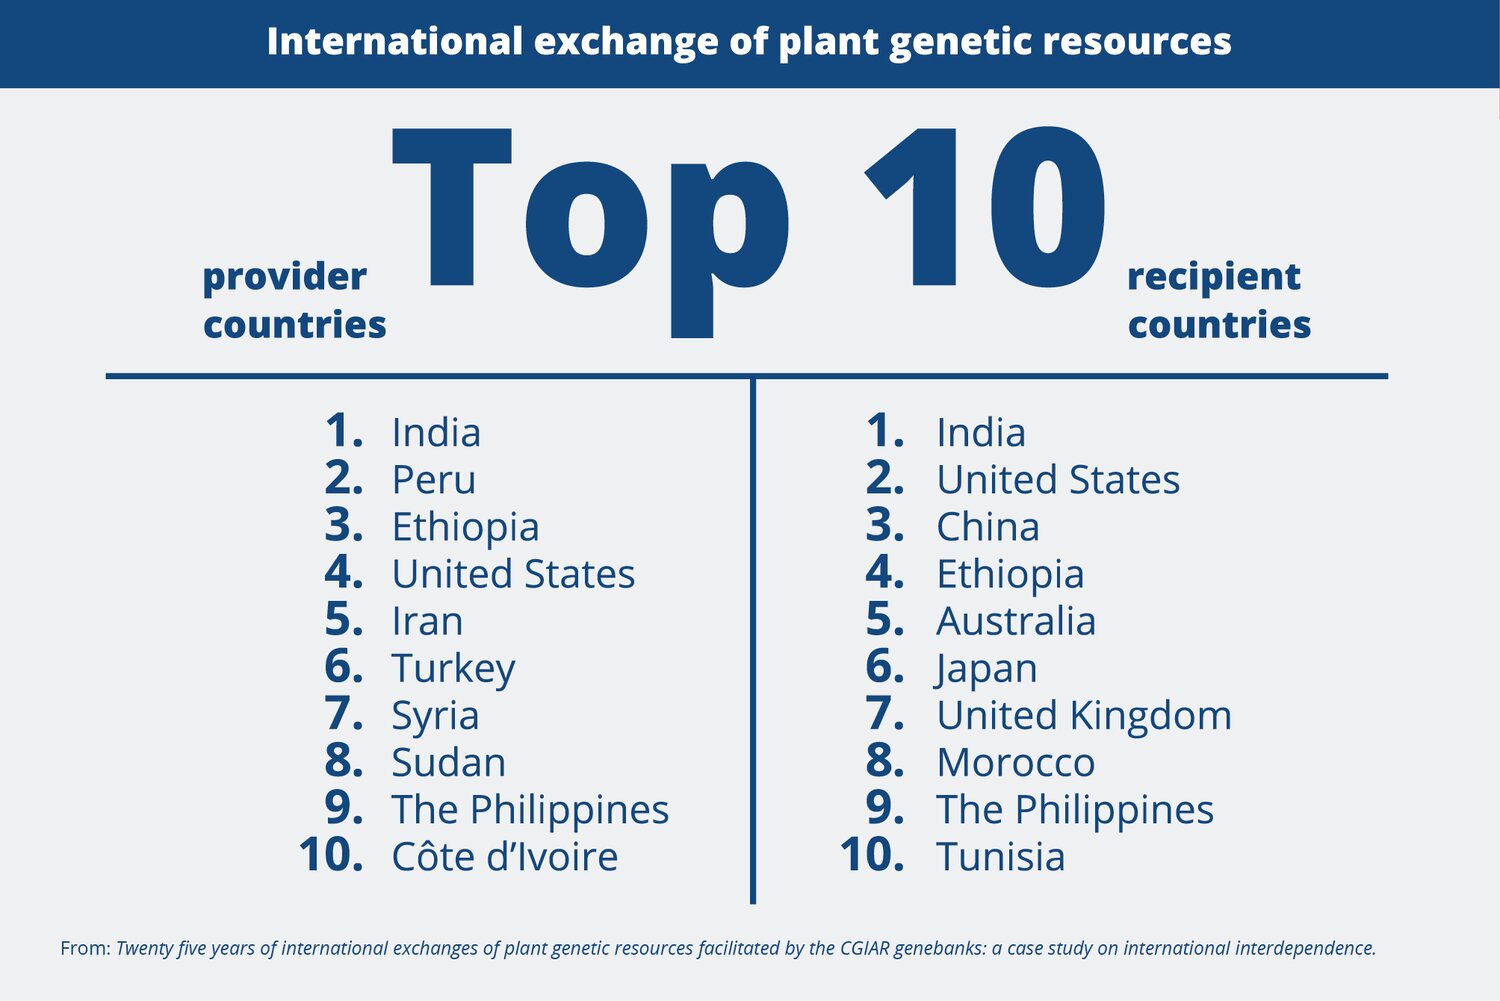 Countries such as India, Ethiopia and the Philippines, which are centers of origin and / or diversity, have provided and requested a lot of material. E.g. Over 70 % of unique accessions originally collected in India went back to India, through the CGIAR-hosted collections. 